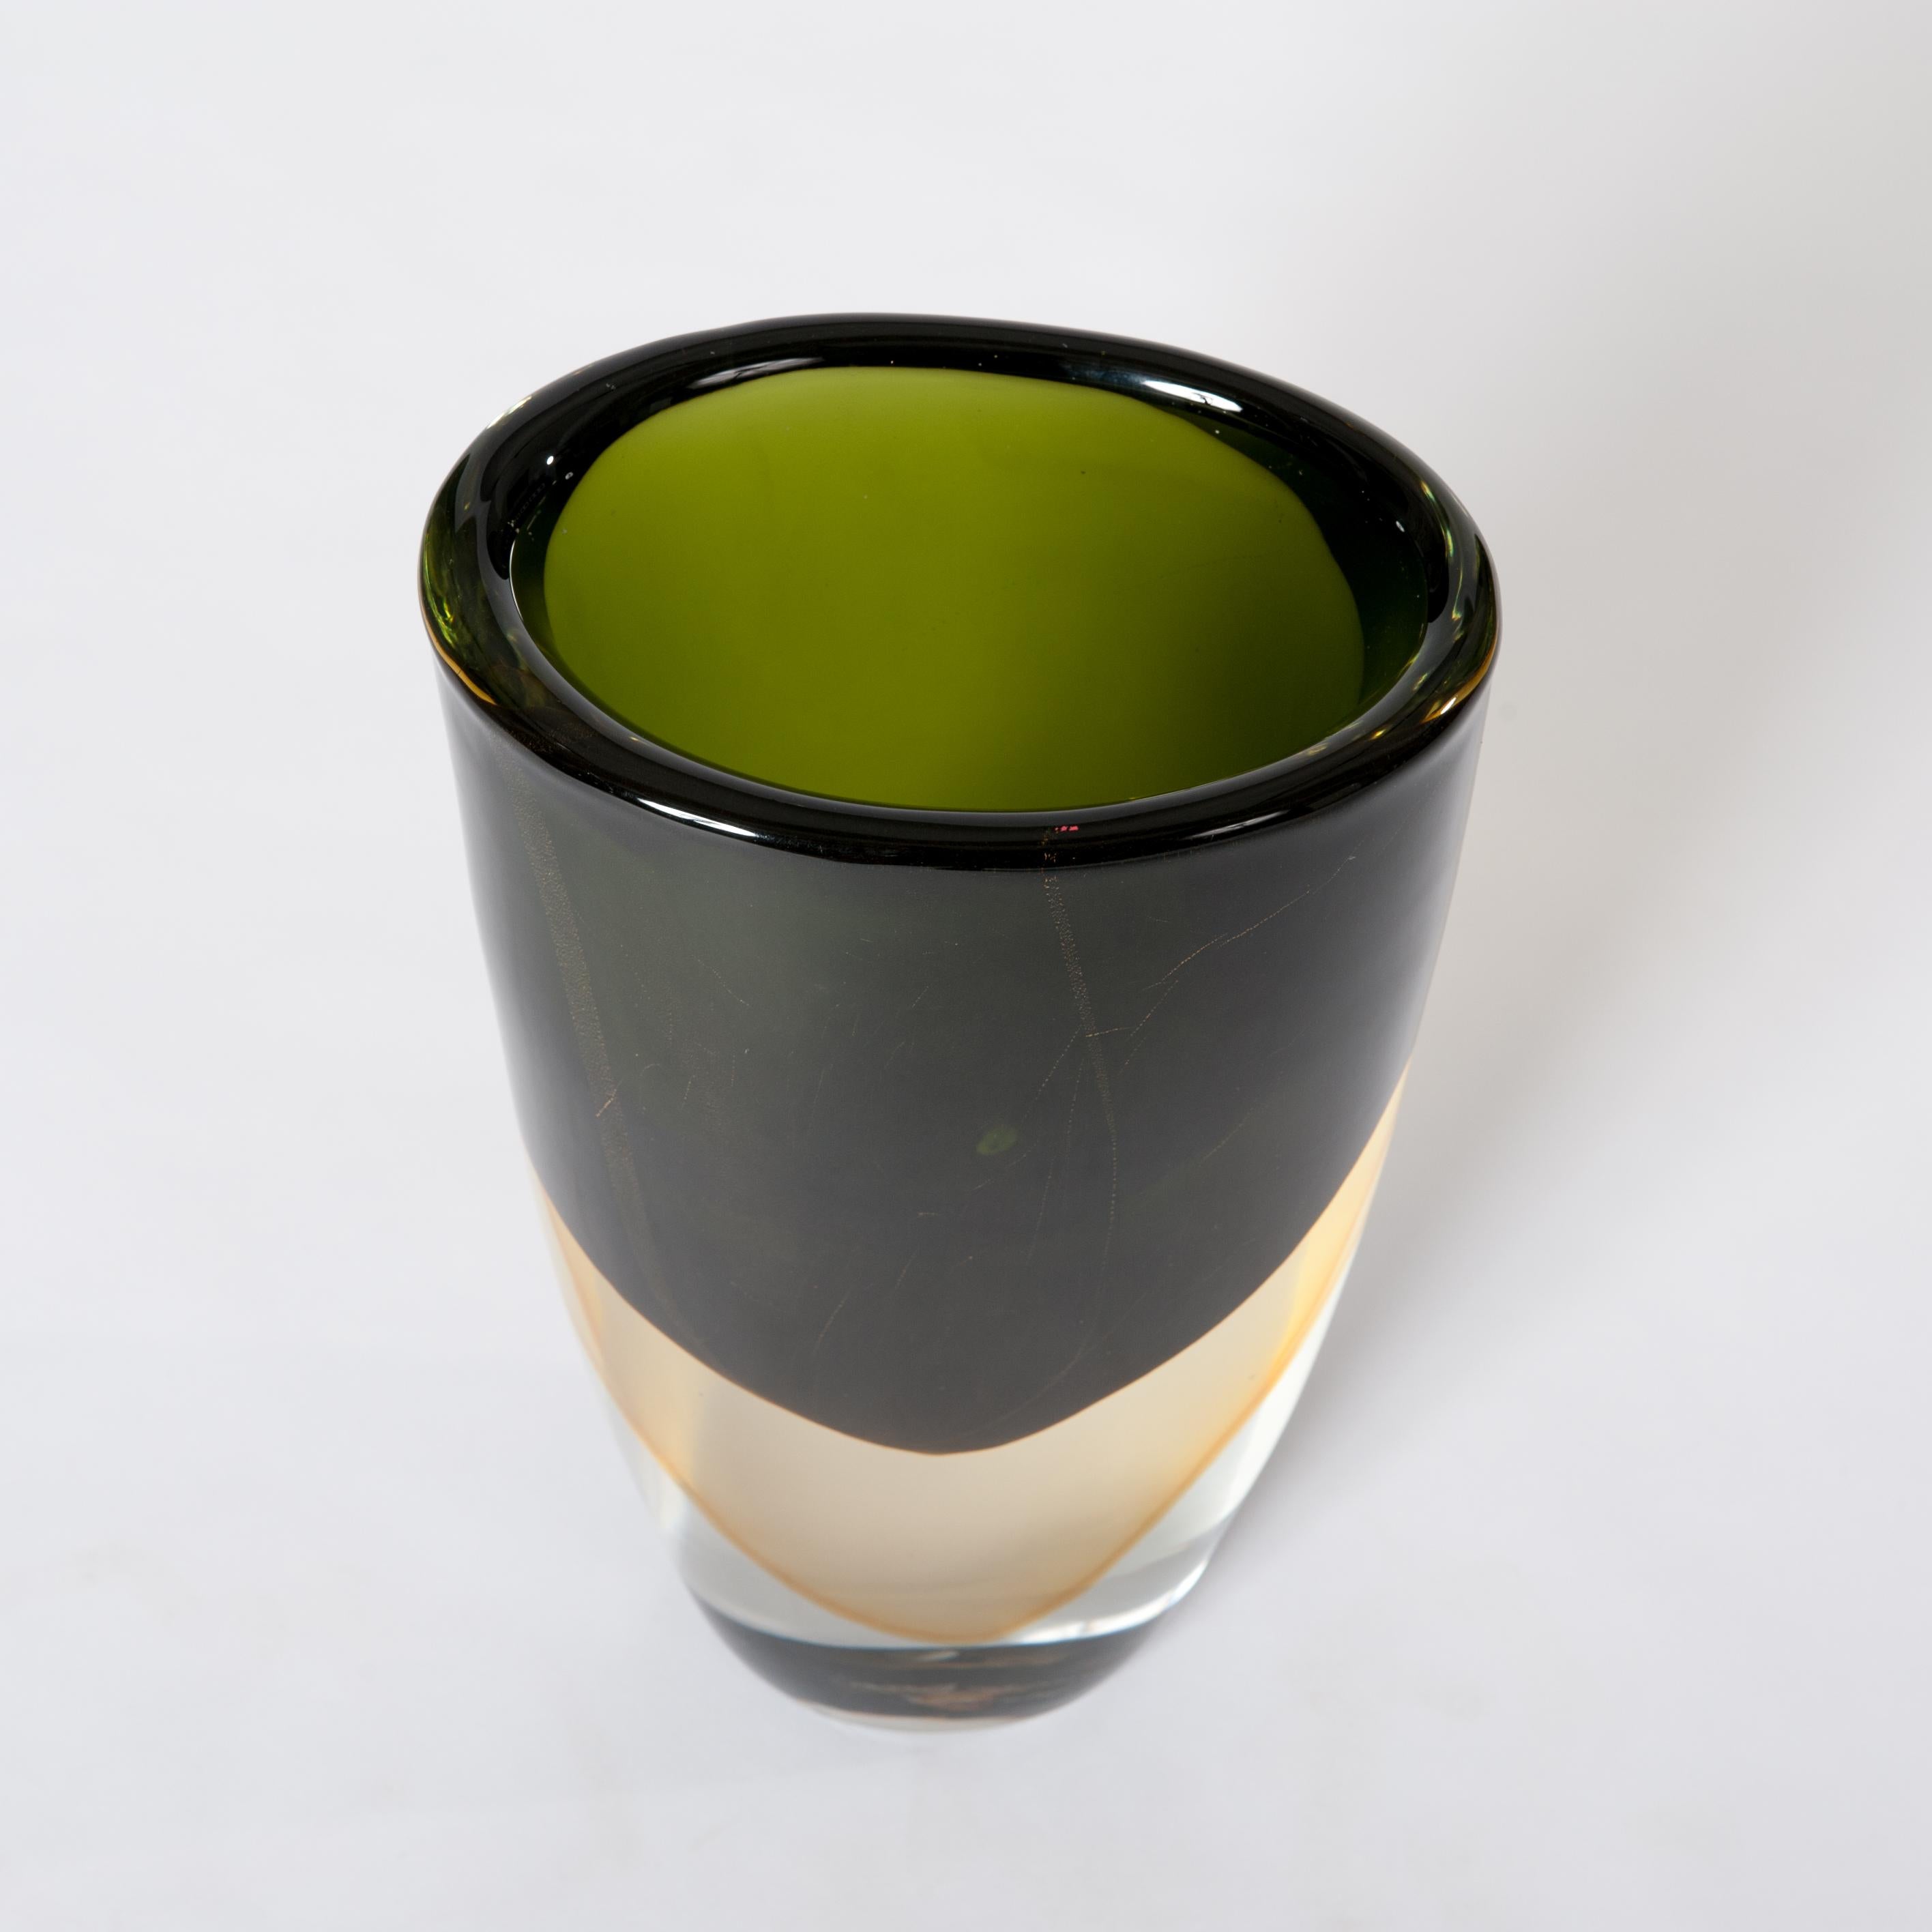 Unique Murano glass Sommerso vase in dark green - yellow - transparent layers, signed by hand Romano Donà at the bottom (11.0 x 7.5cm)

Heavy (11.5kg) and massif vessel handmade in darkgreen with yellow layering below and a solid transparent base.